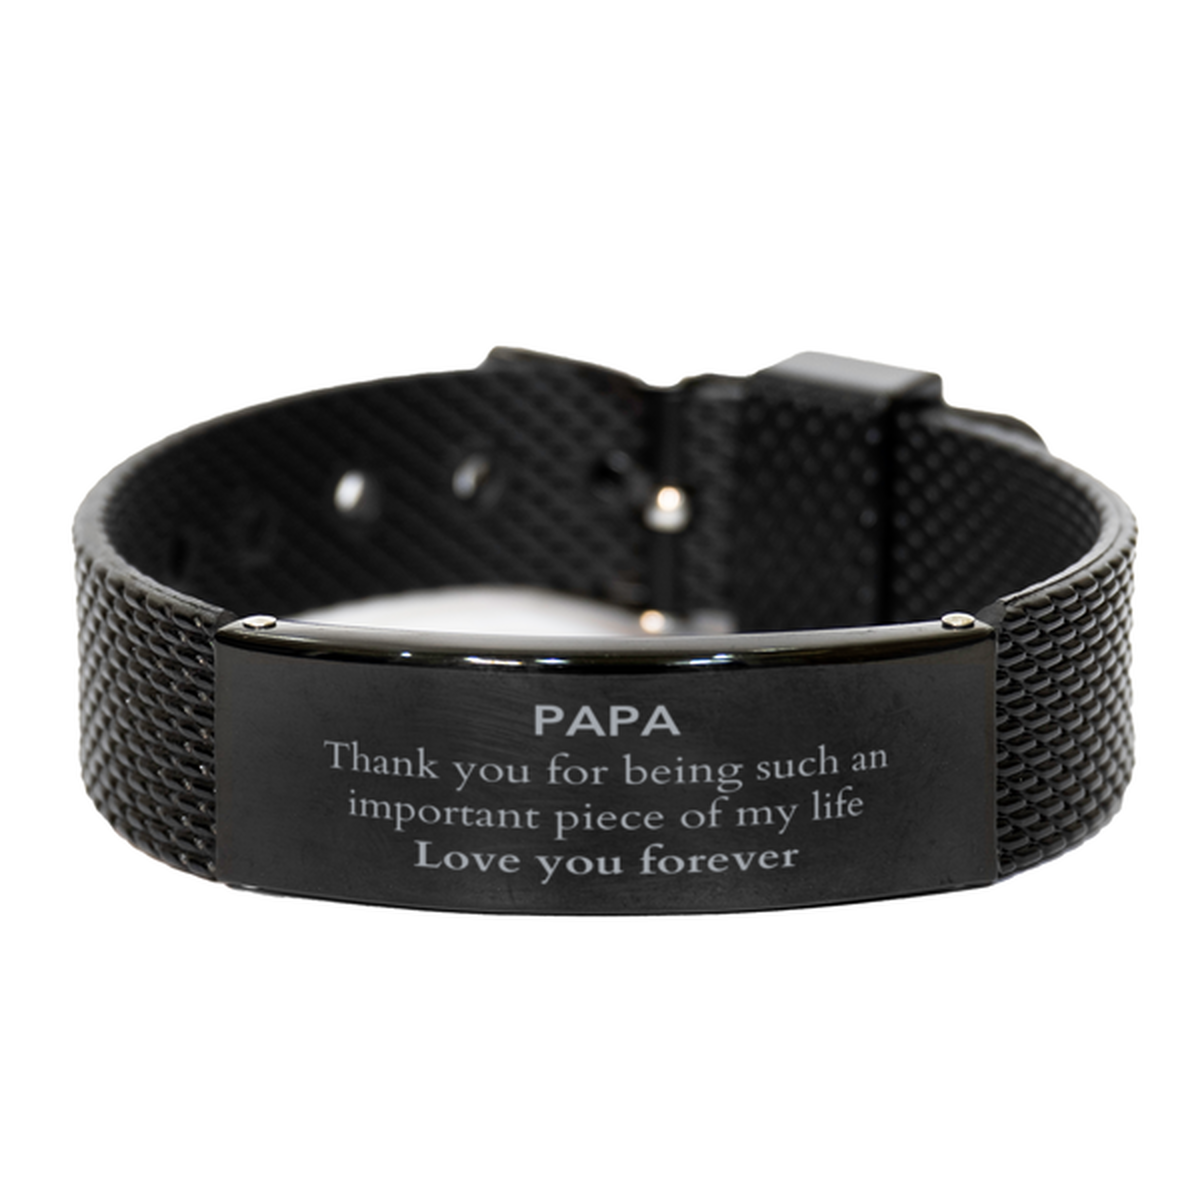 Appropriate Papa Black Shark Mesh Bracelet Epic Birthday Gifts for Papa Thank you for being such an important piece of my life Papa Christmas Mothers Fathers Day